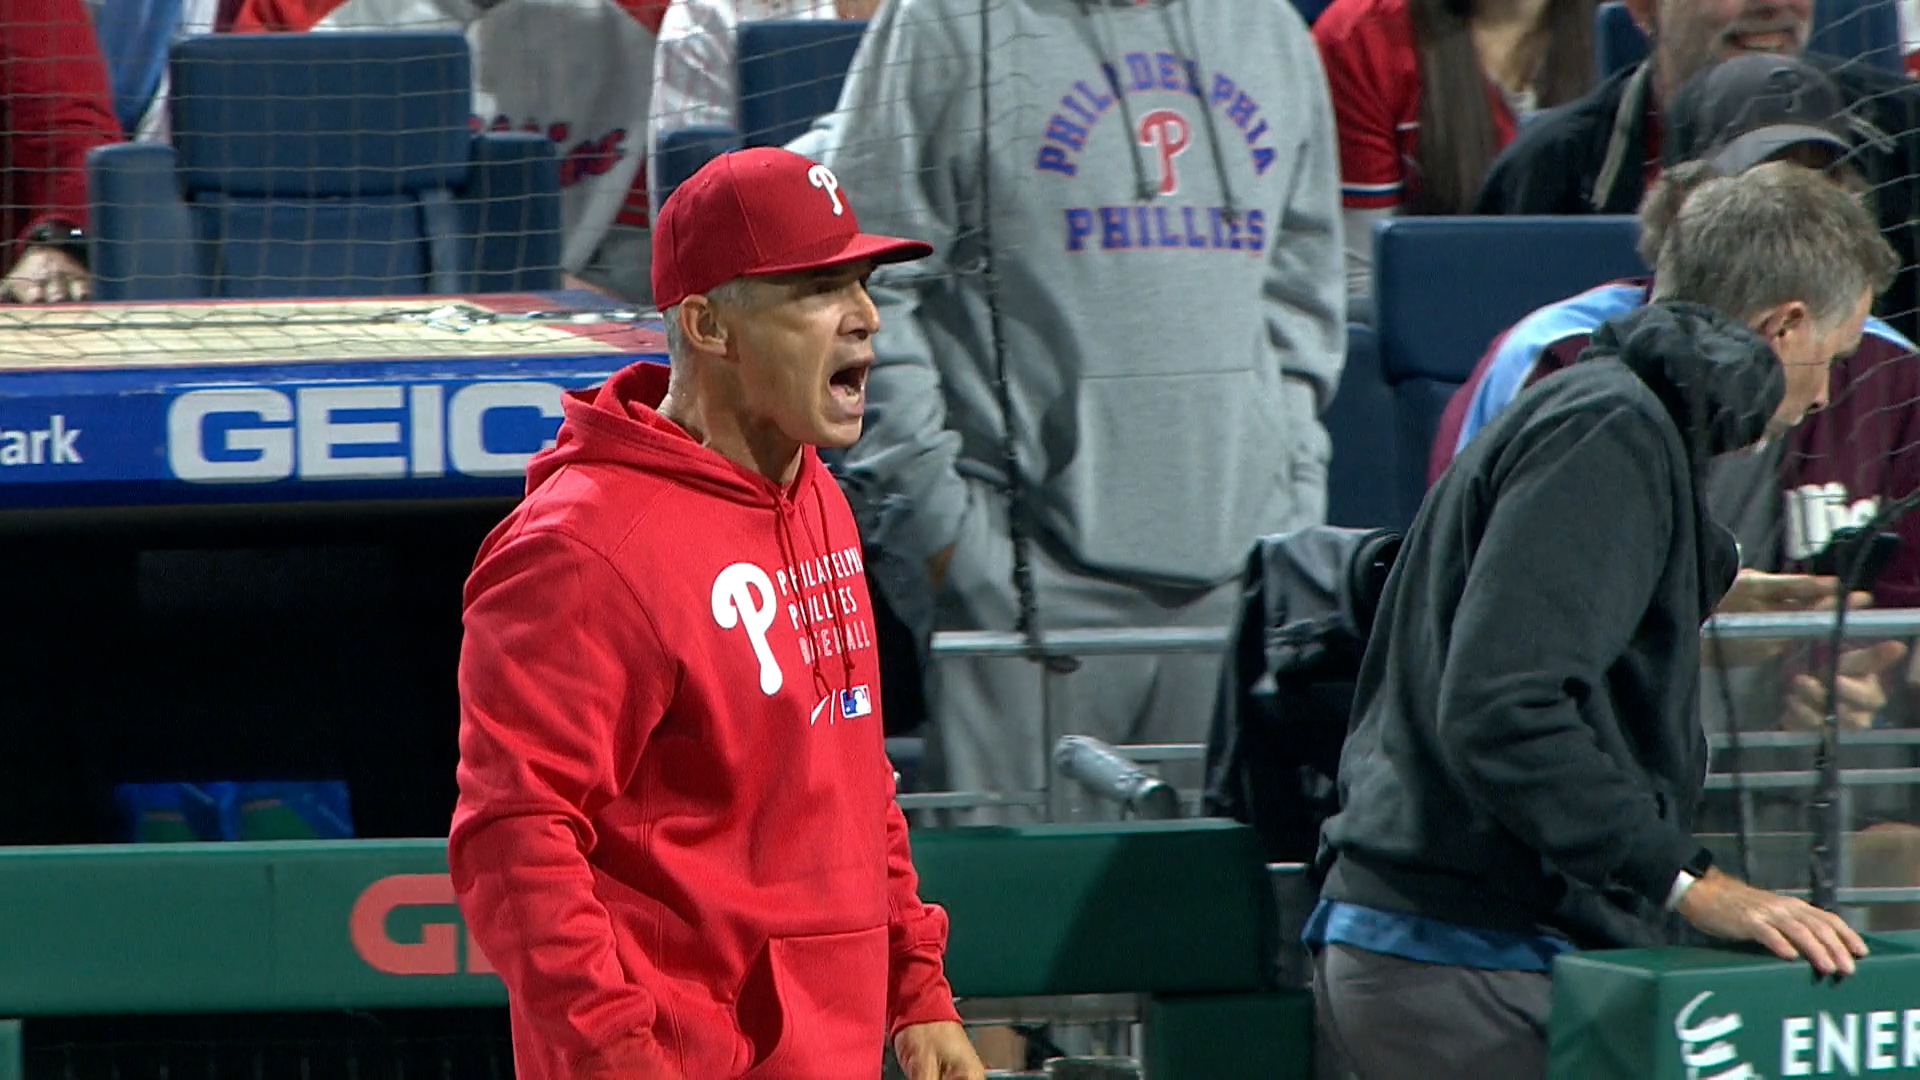 Joe Girardi almost punched an umpire in the face